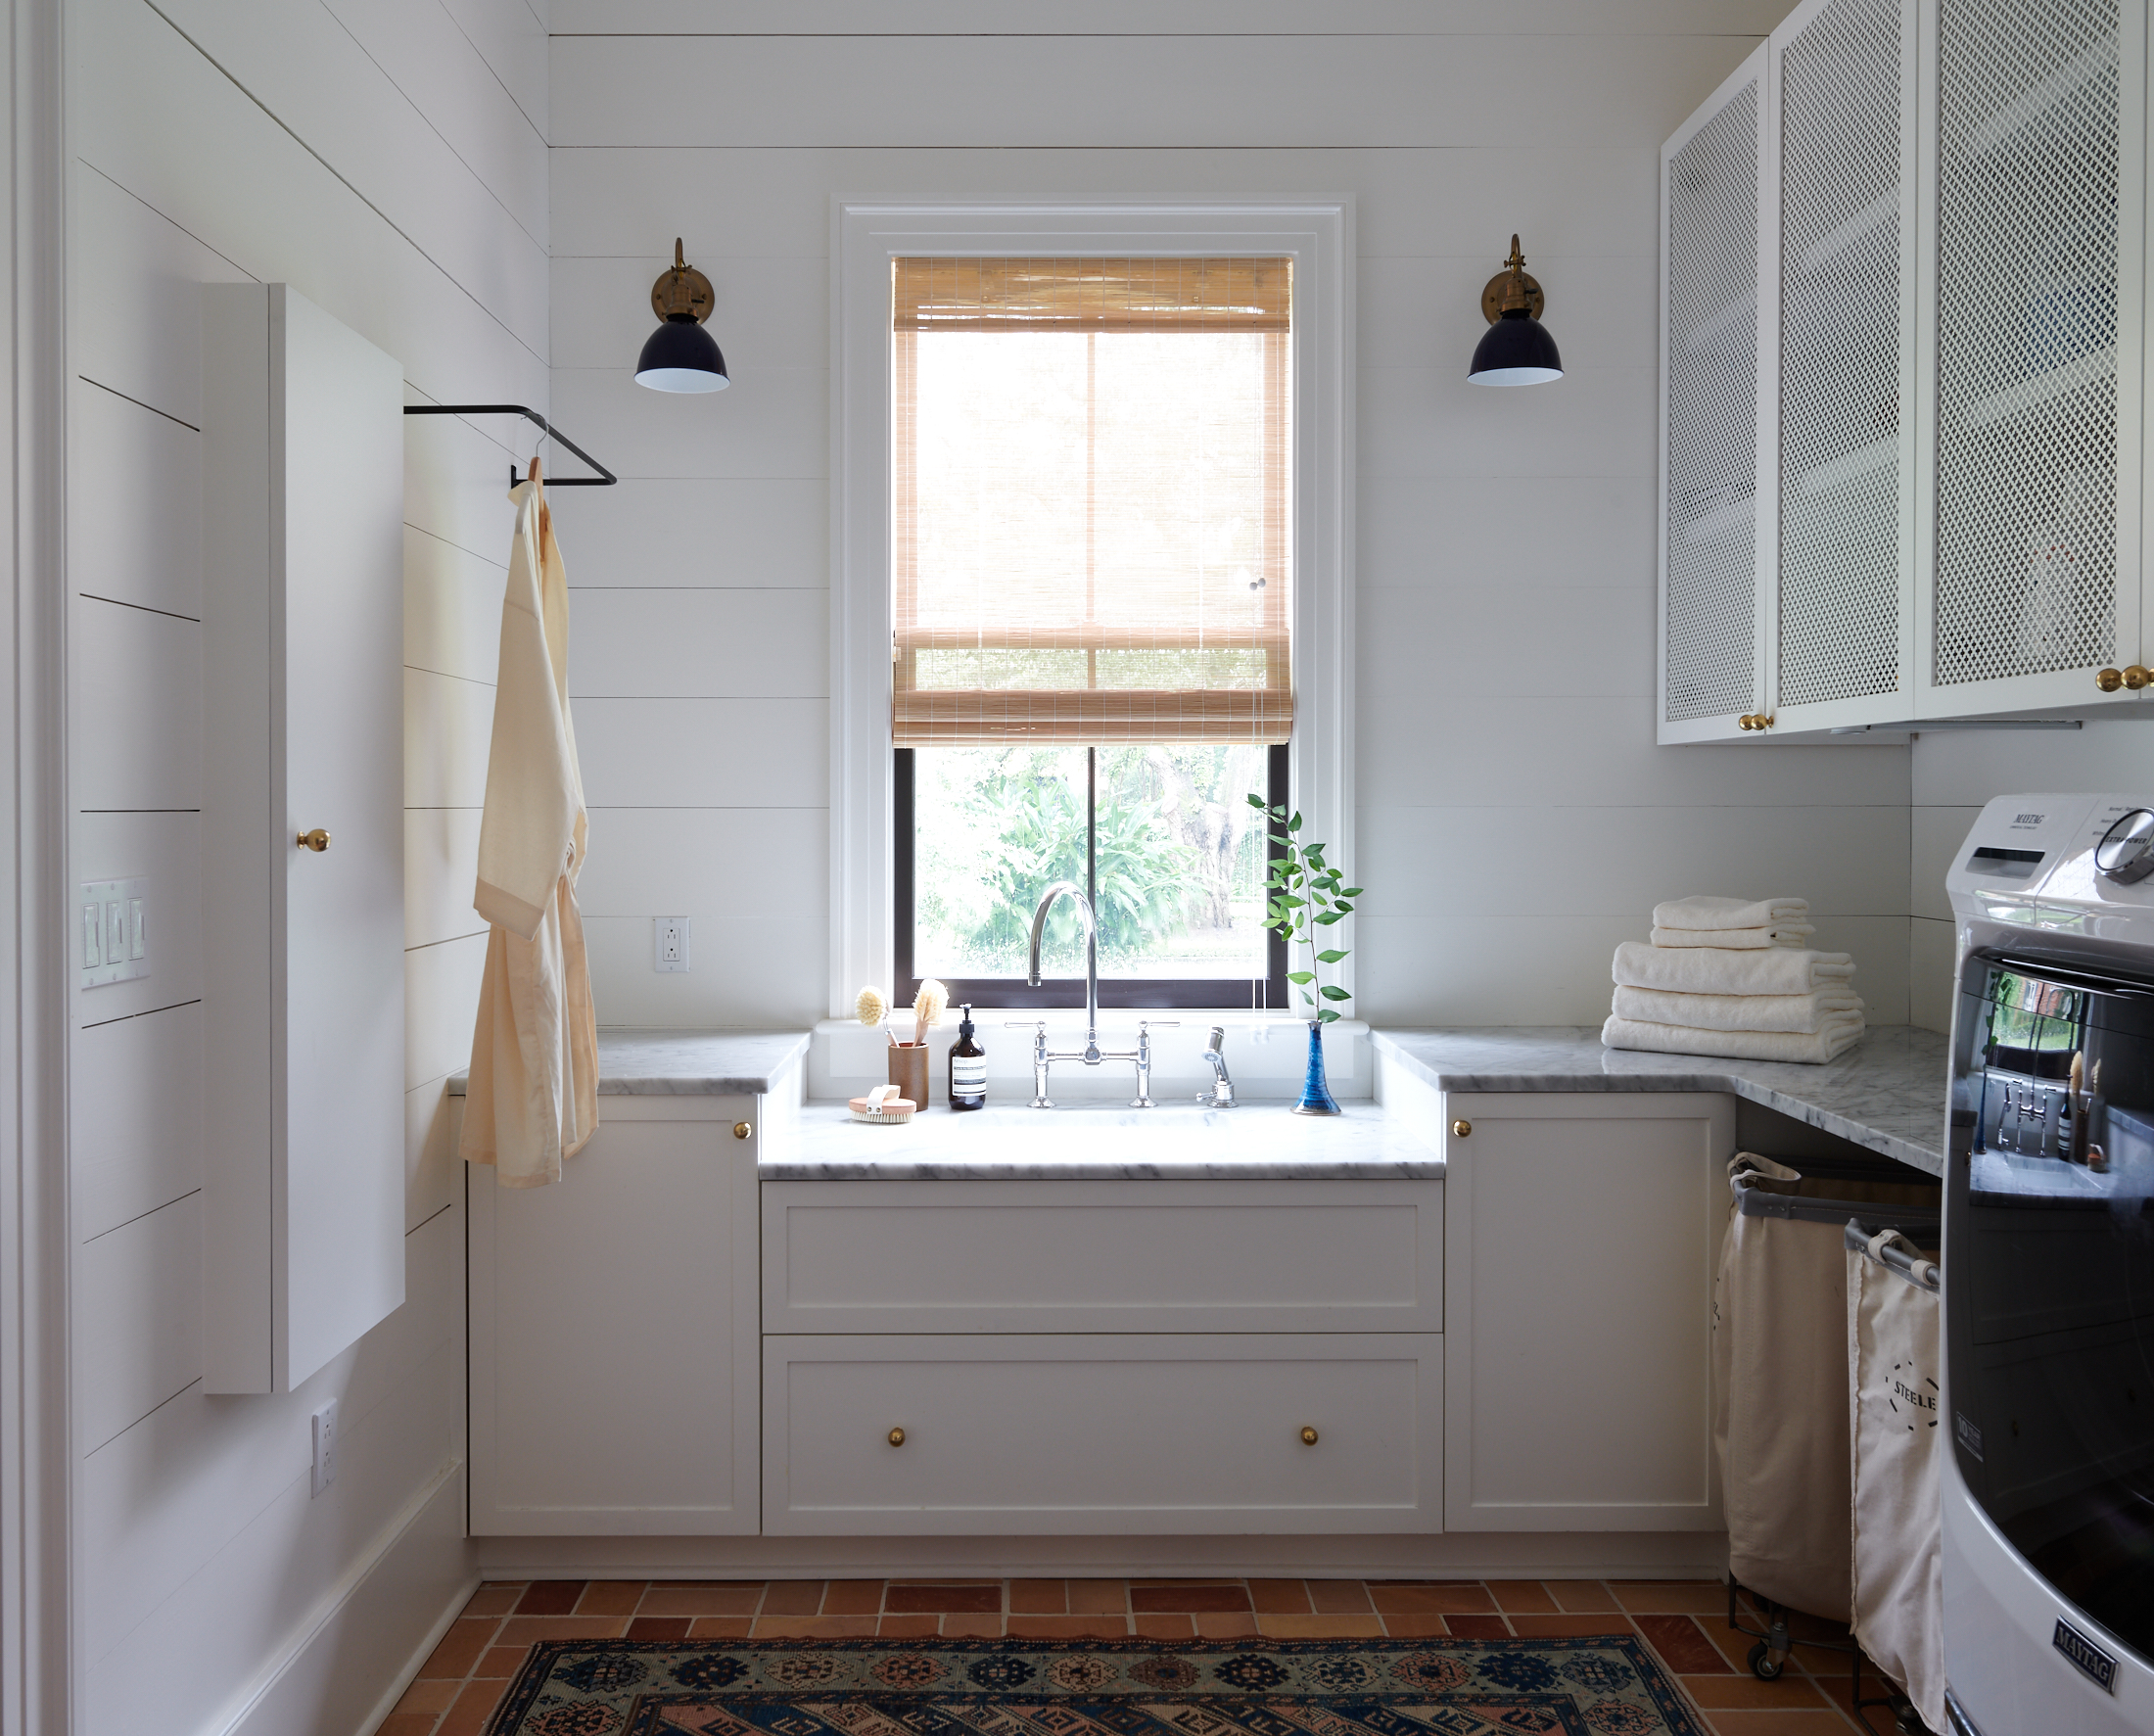 Laundry room by Alison Gootee Photography for Logan Killen Interiors 